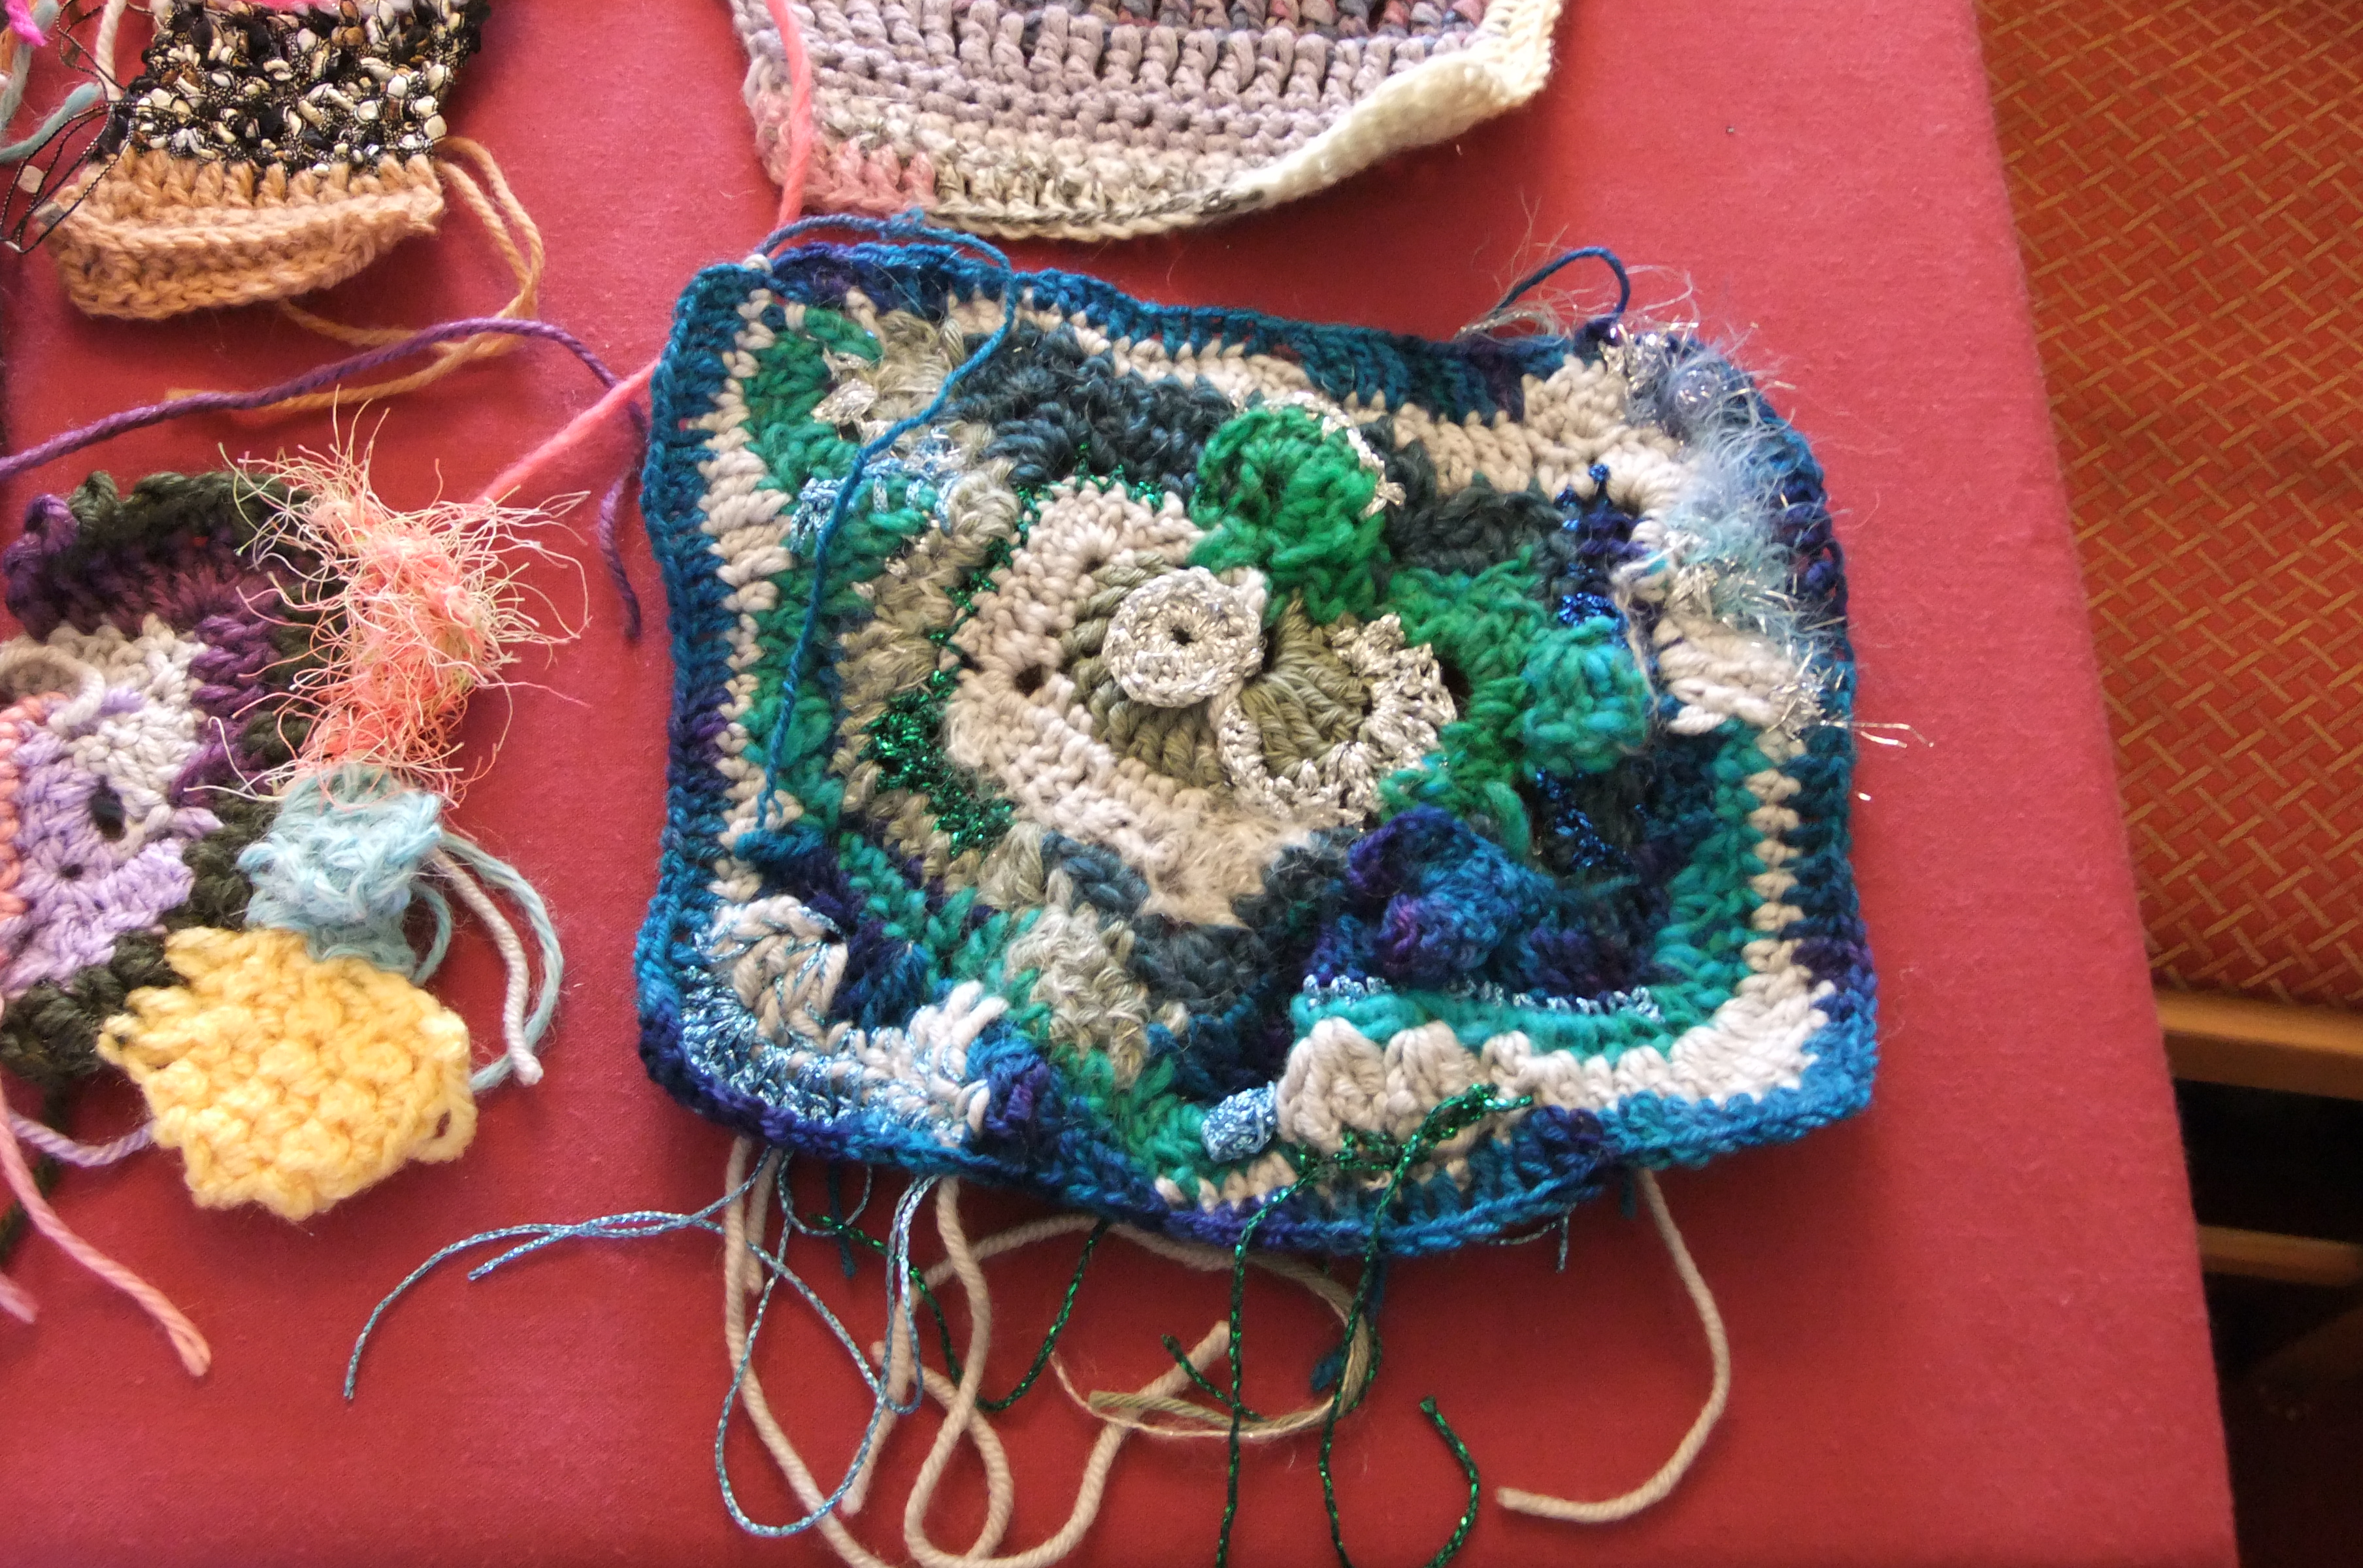 freeform crochet sample from a crochet workshop with debbie tomkies of dt craft and design